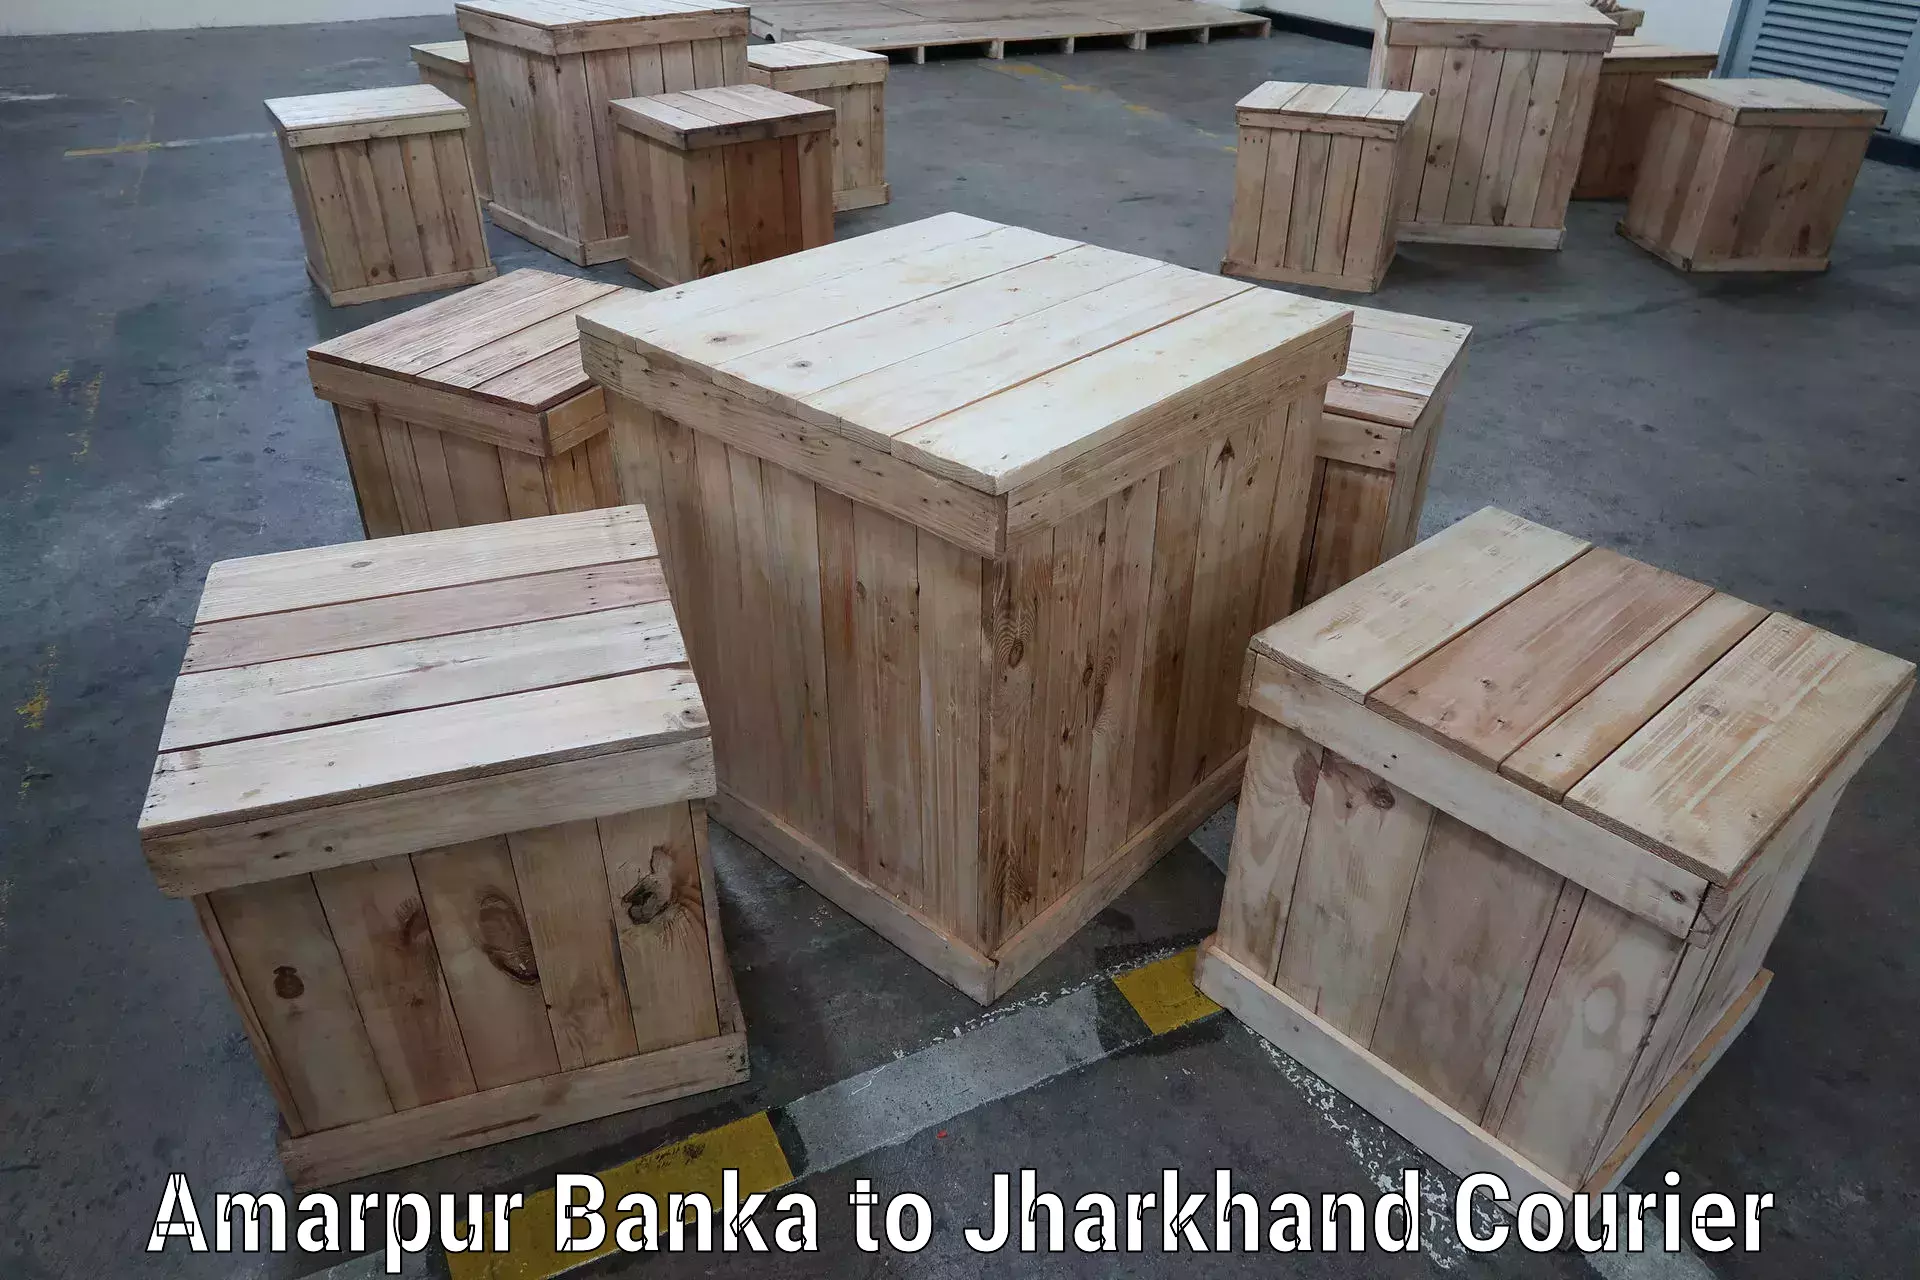 Efficient shipping operations Amarpur Banka to Chandil